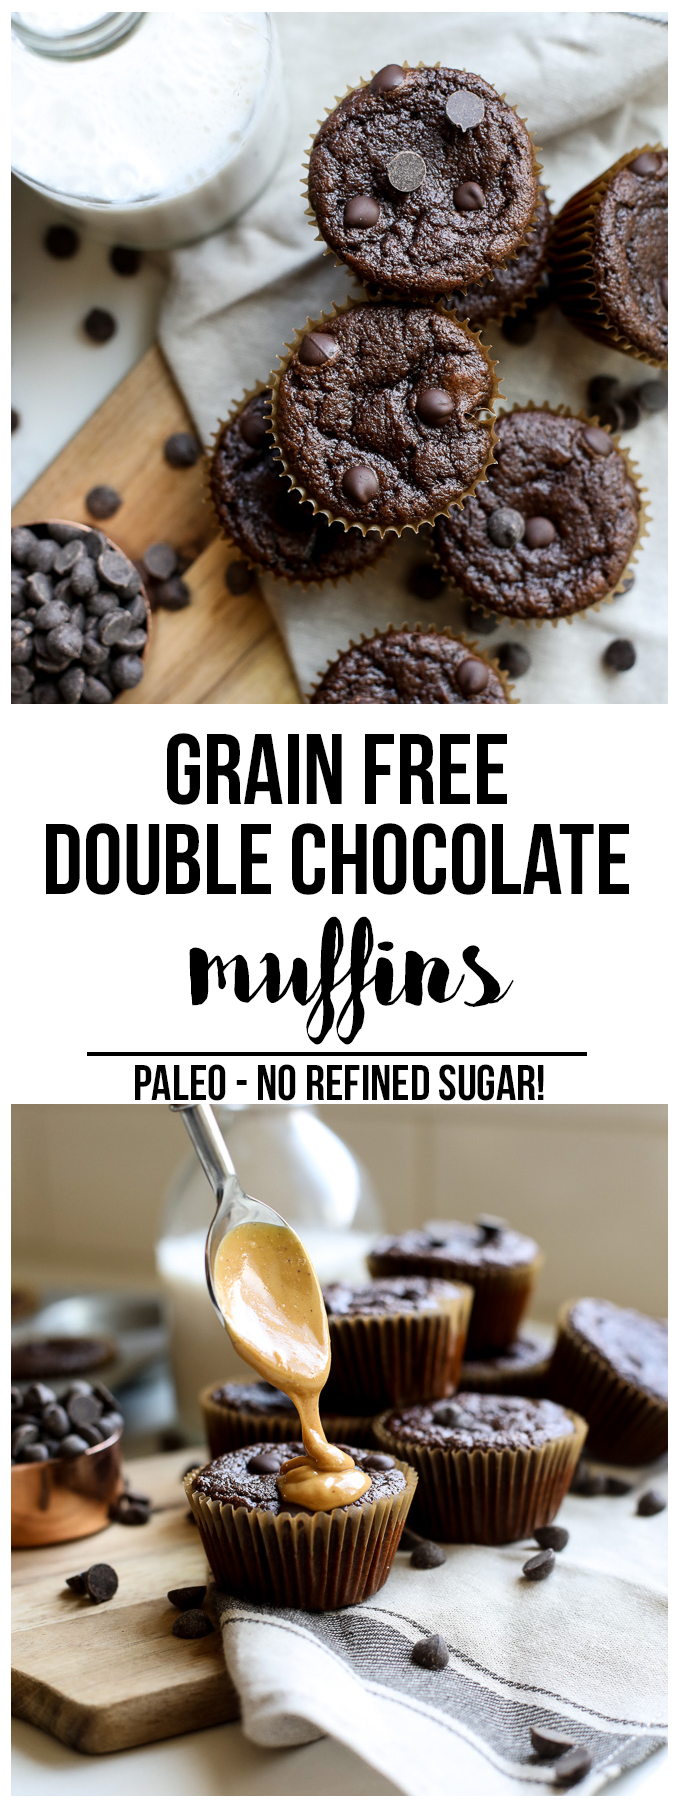 These Grain Free Chocolate Muffins are sweetened with just a little honey which makes them paleo but so tasty that anyone will love them!!